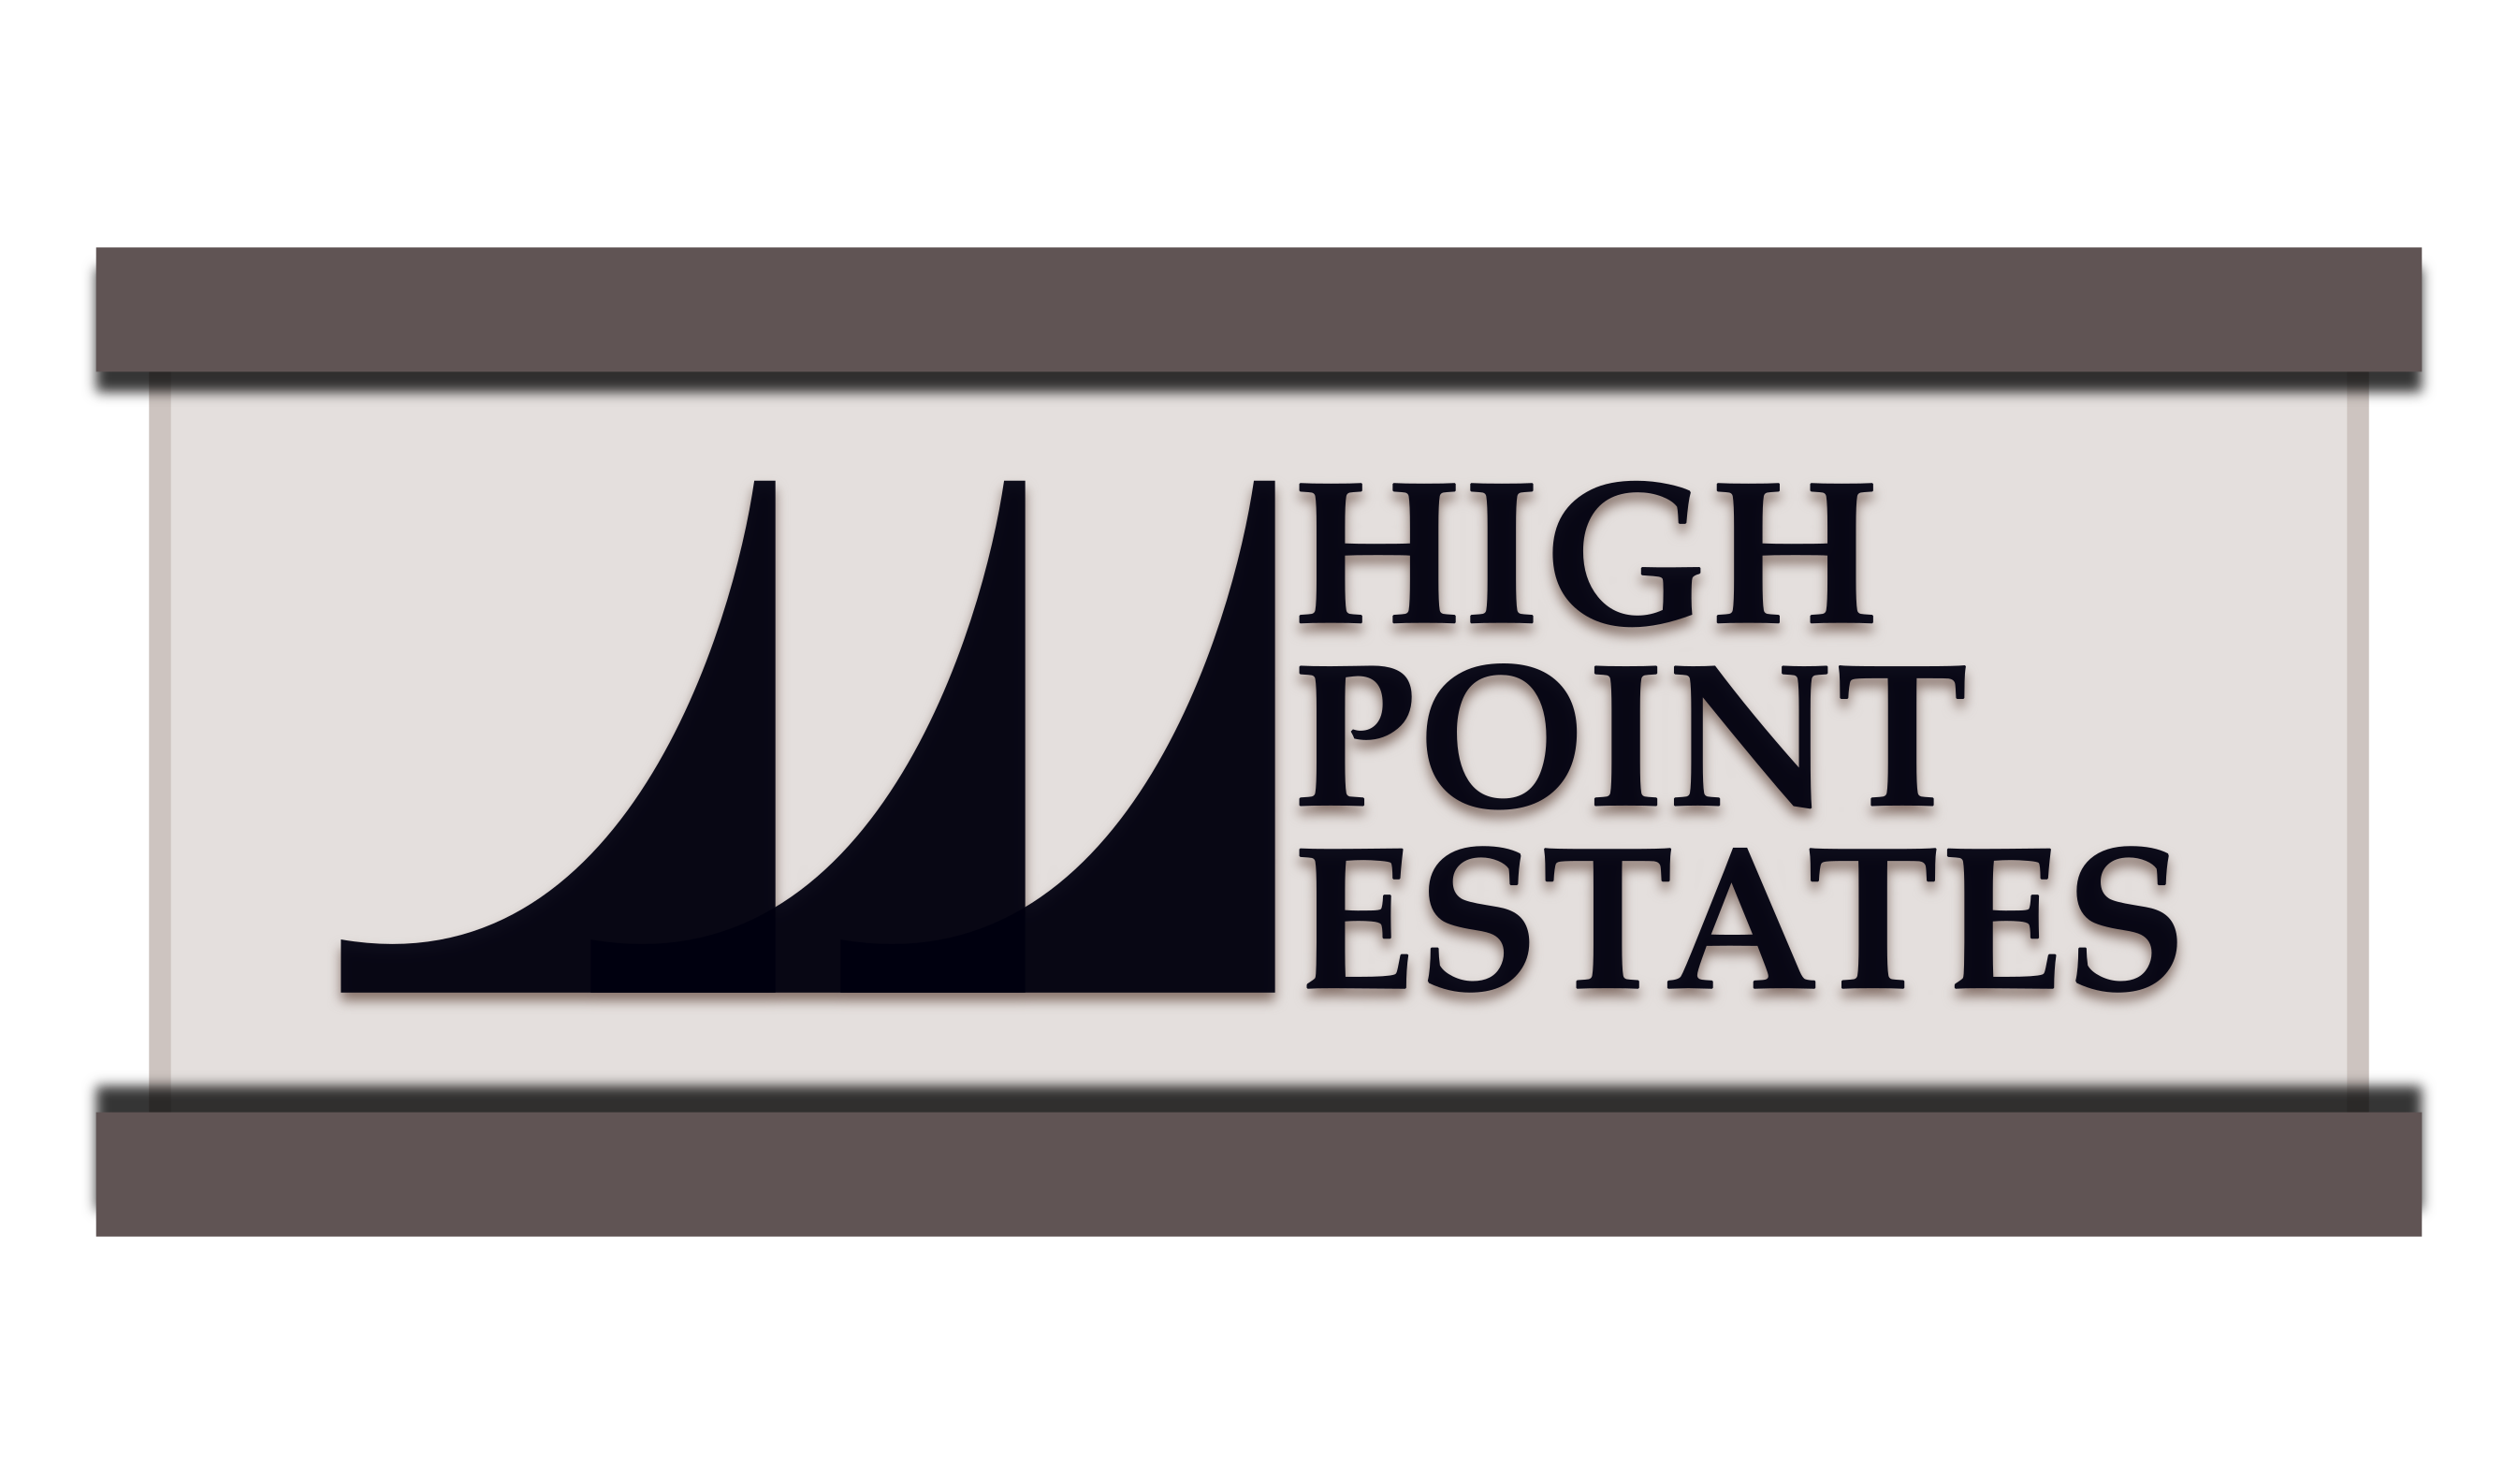 High Point Estates Neighborhood Caters to Families